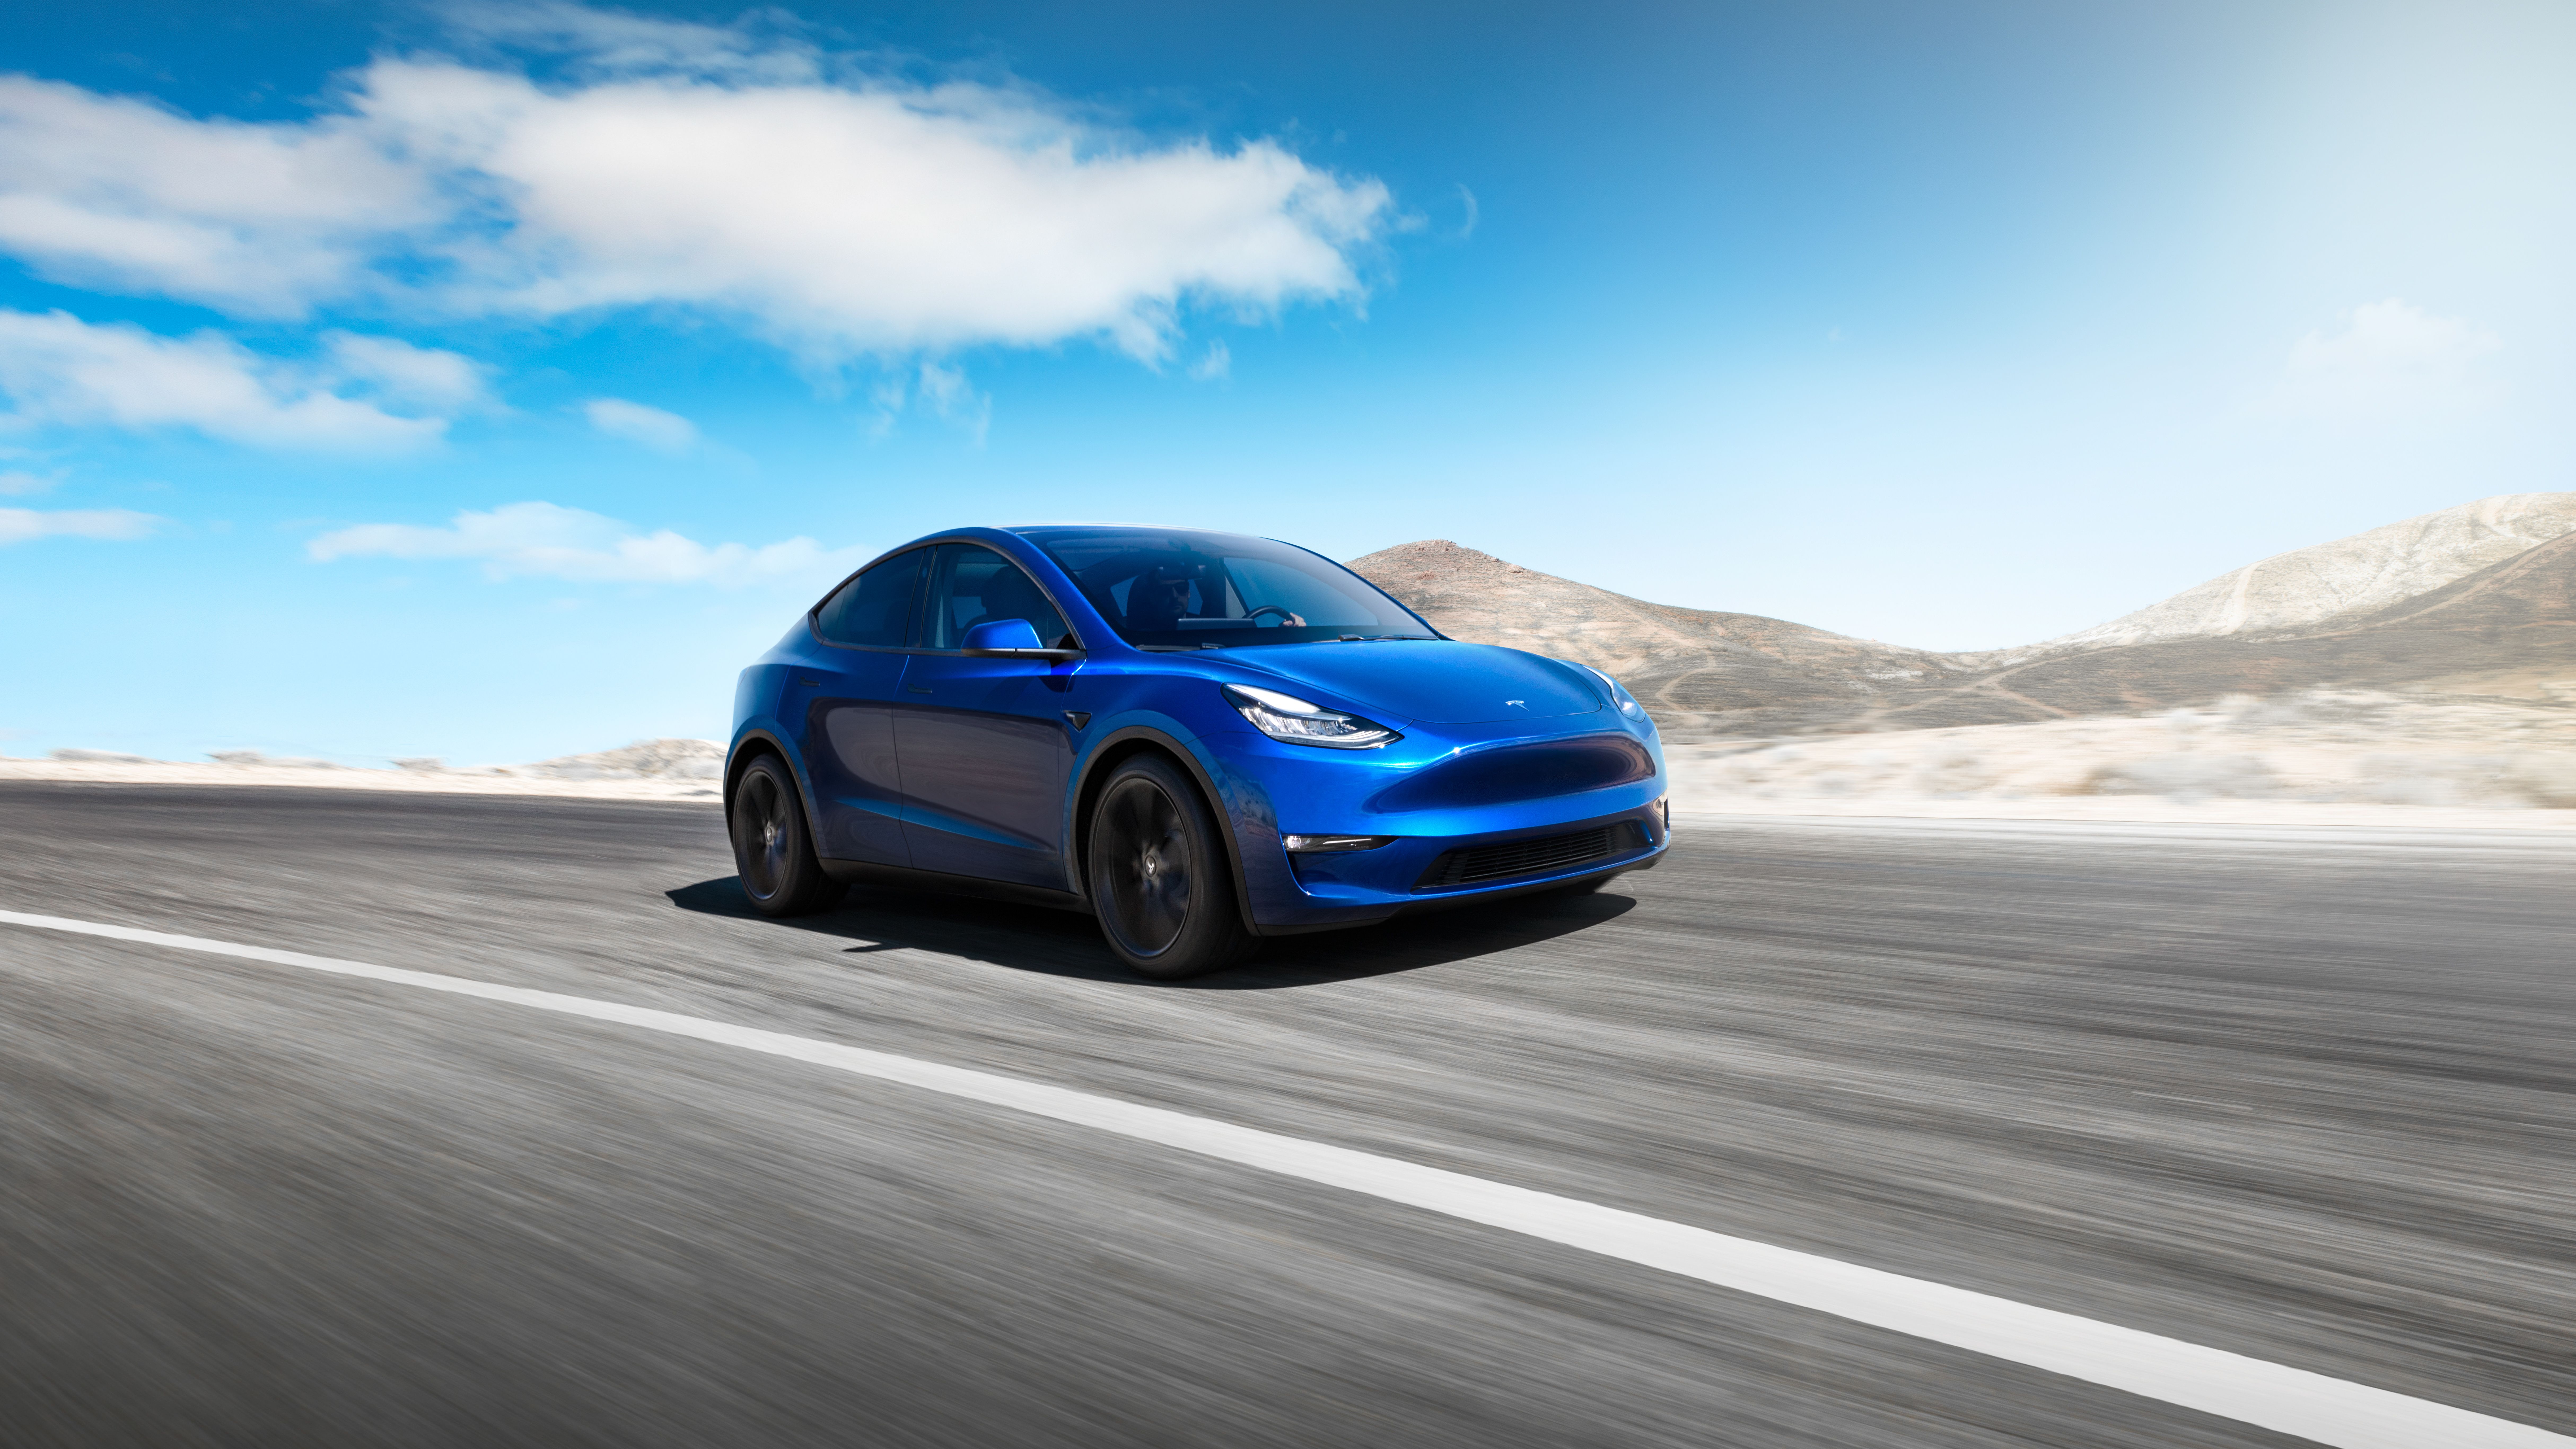 2021 The Tesla Model Y With Track Mode Can Straighten Curves Like Nobody's Business